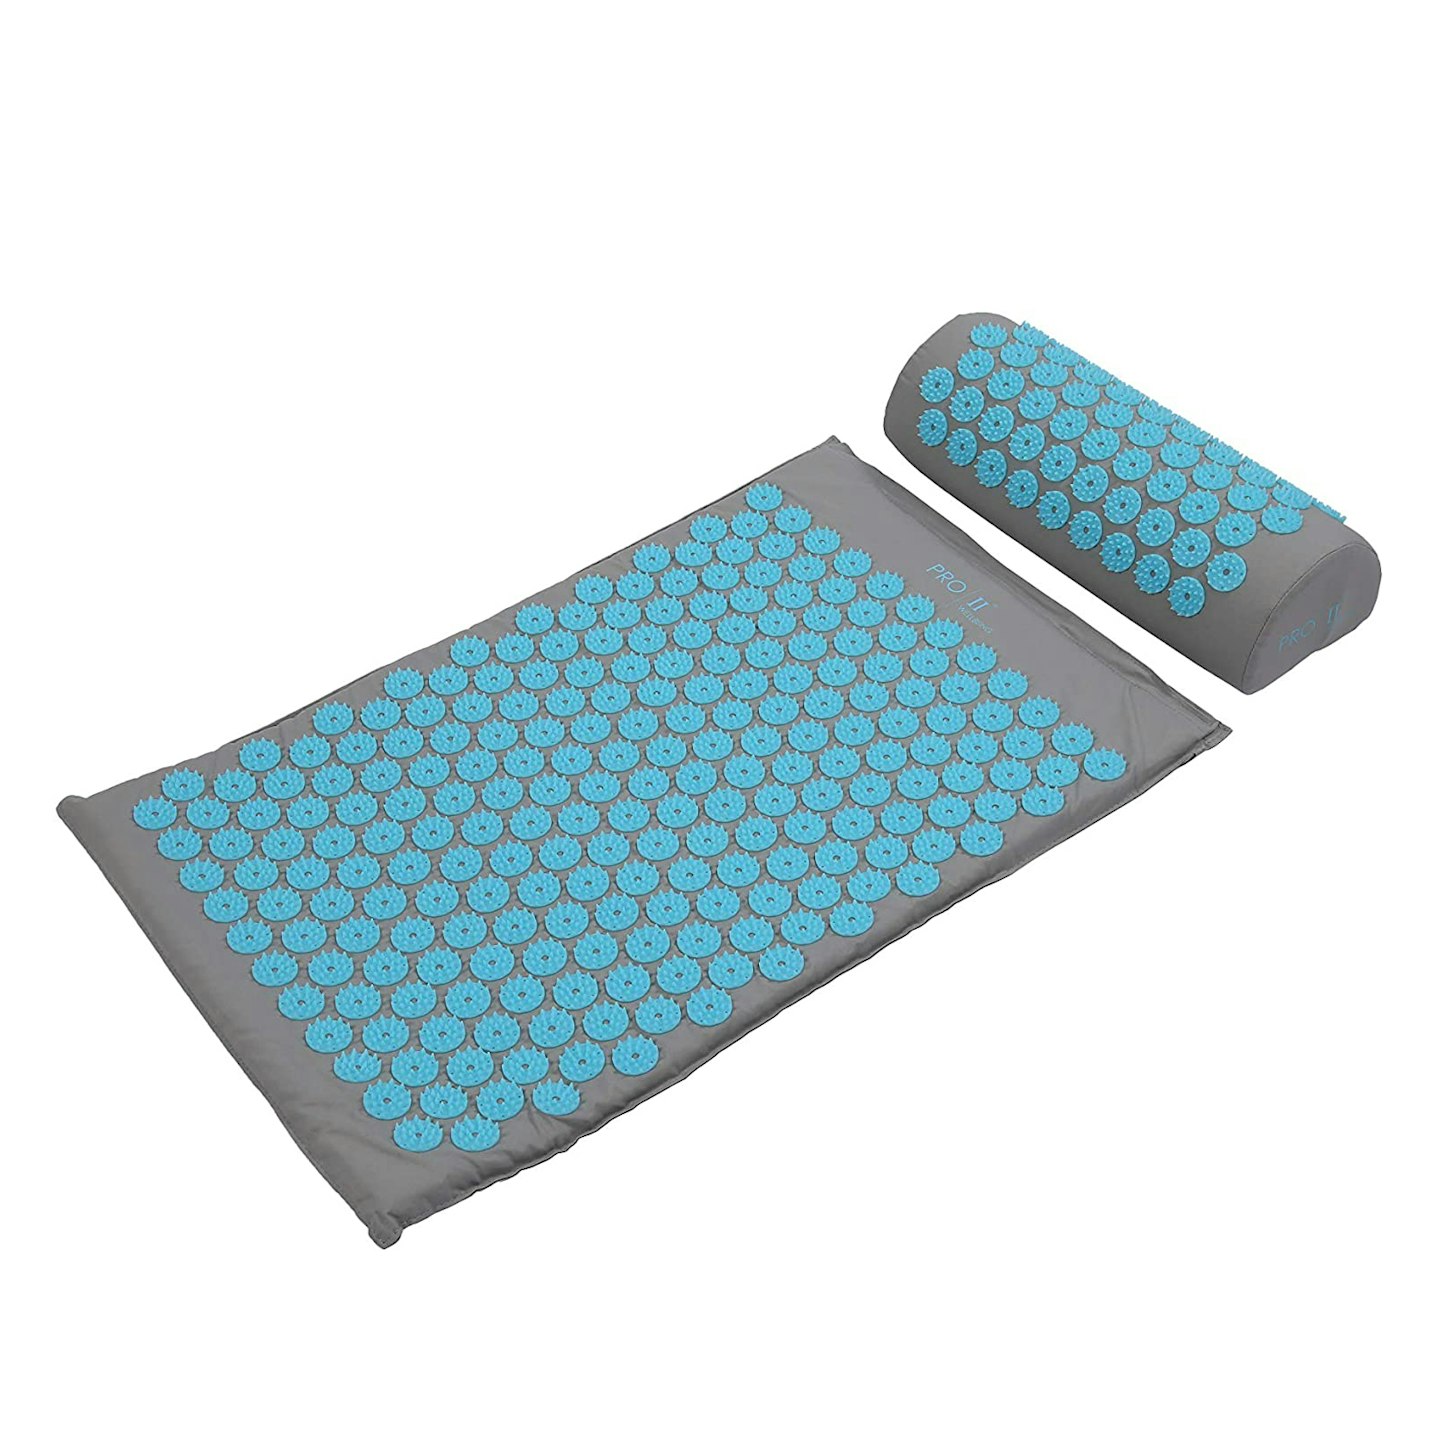 PRO 11 WELLBEING Acupressure mat and Pillow Set 